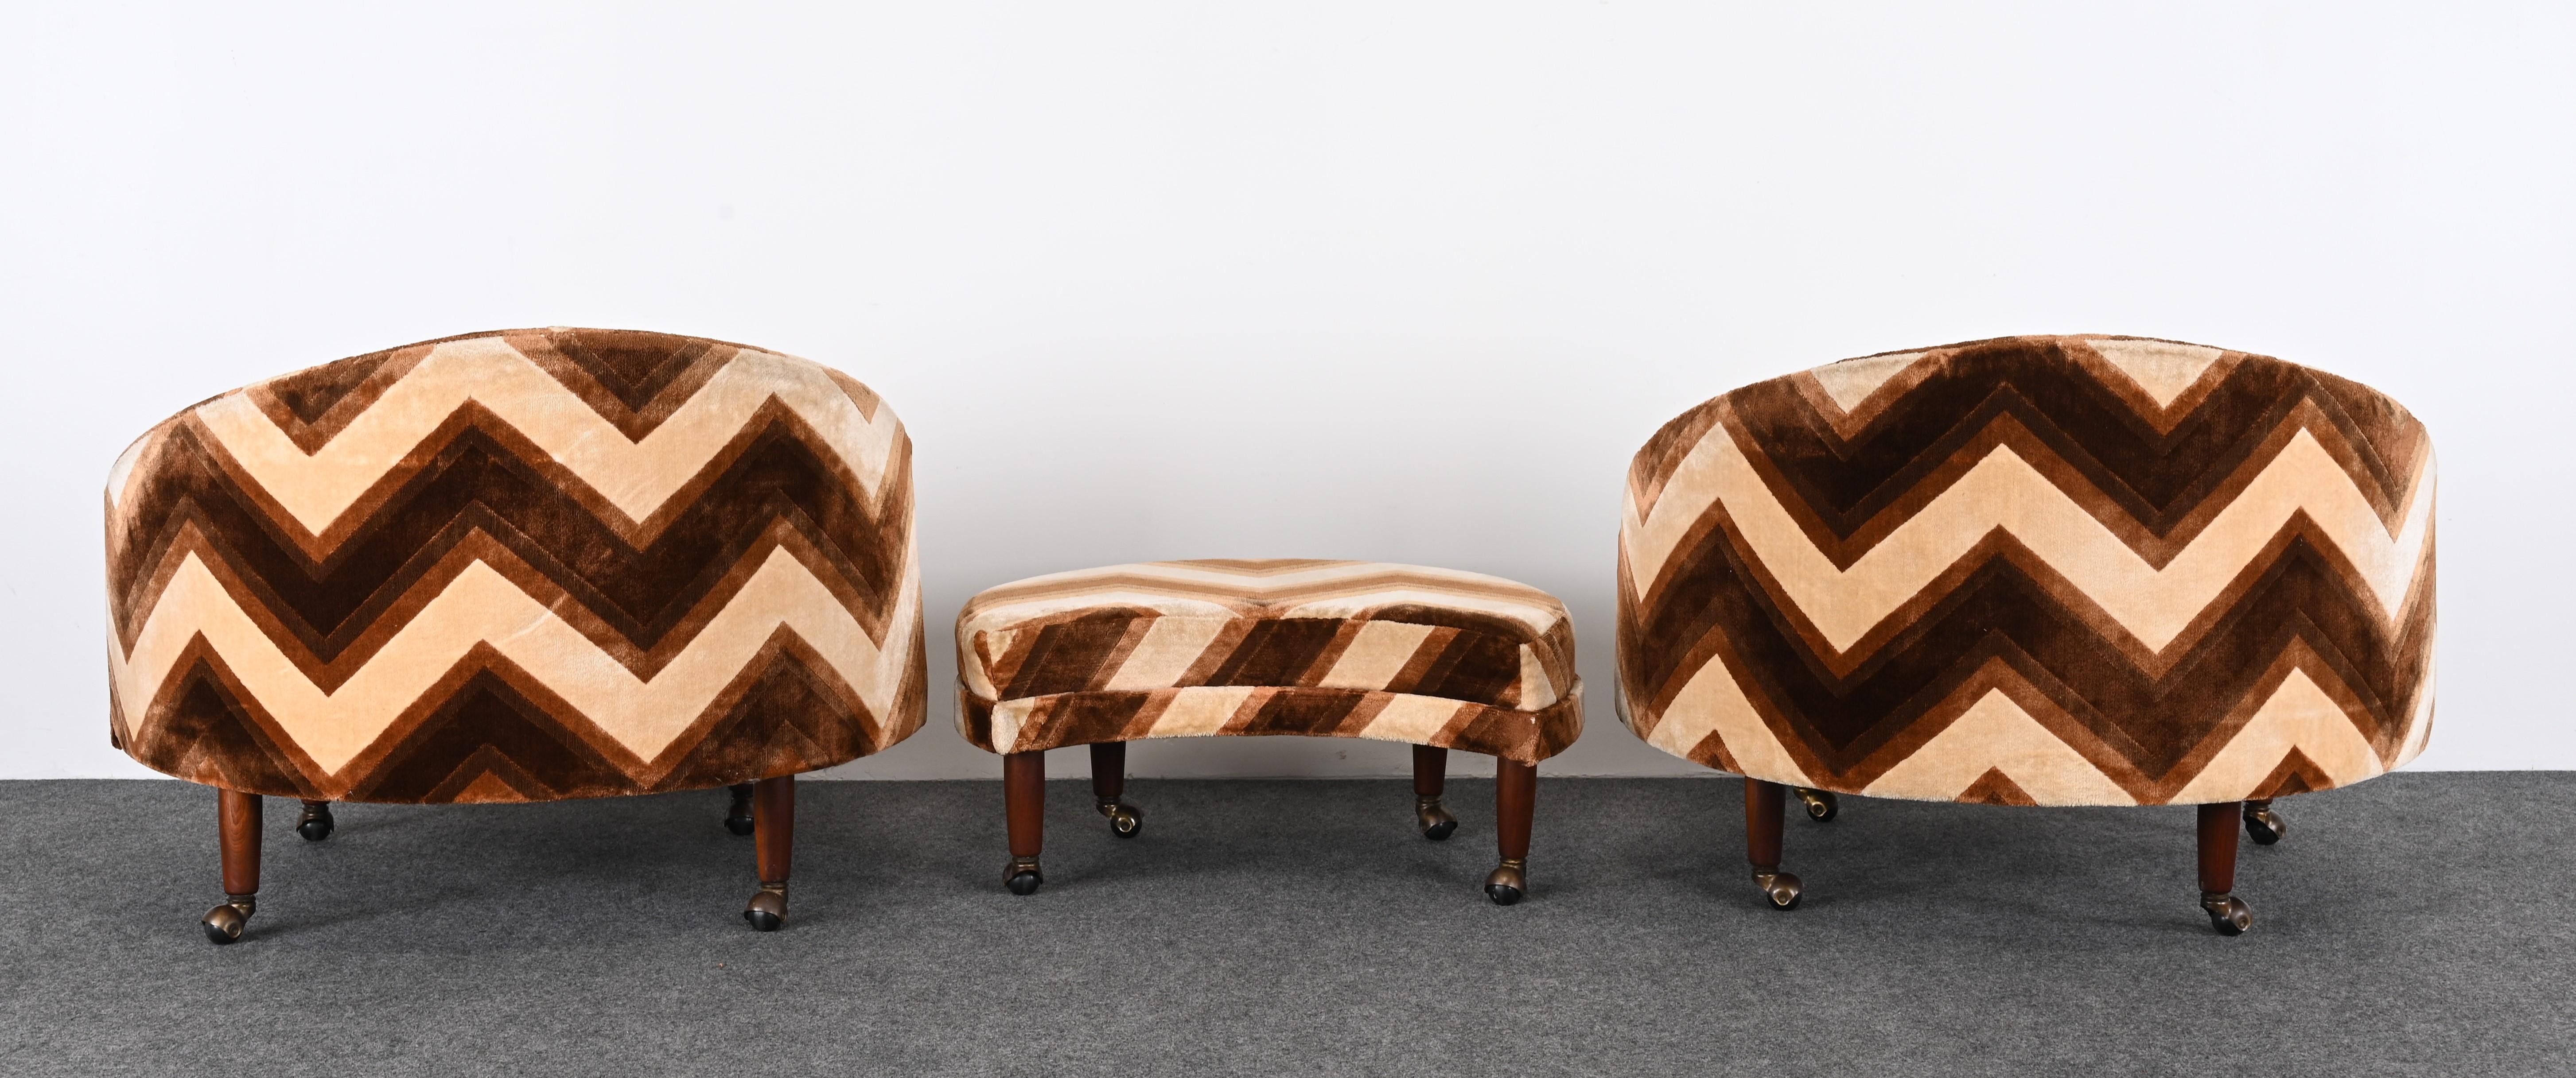 Adrian Pearsall Pair of Havana Lounge Chairs and Ottoman, 1965 For Sale 7